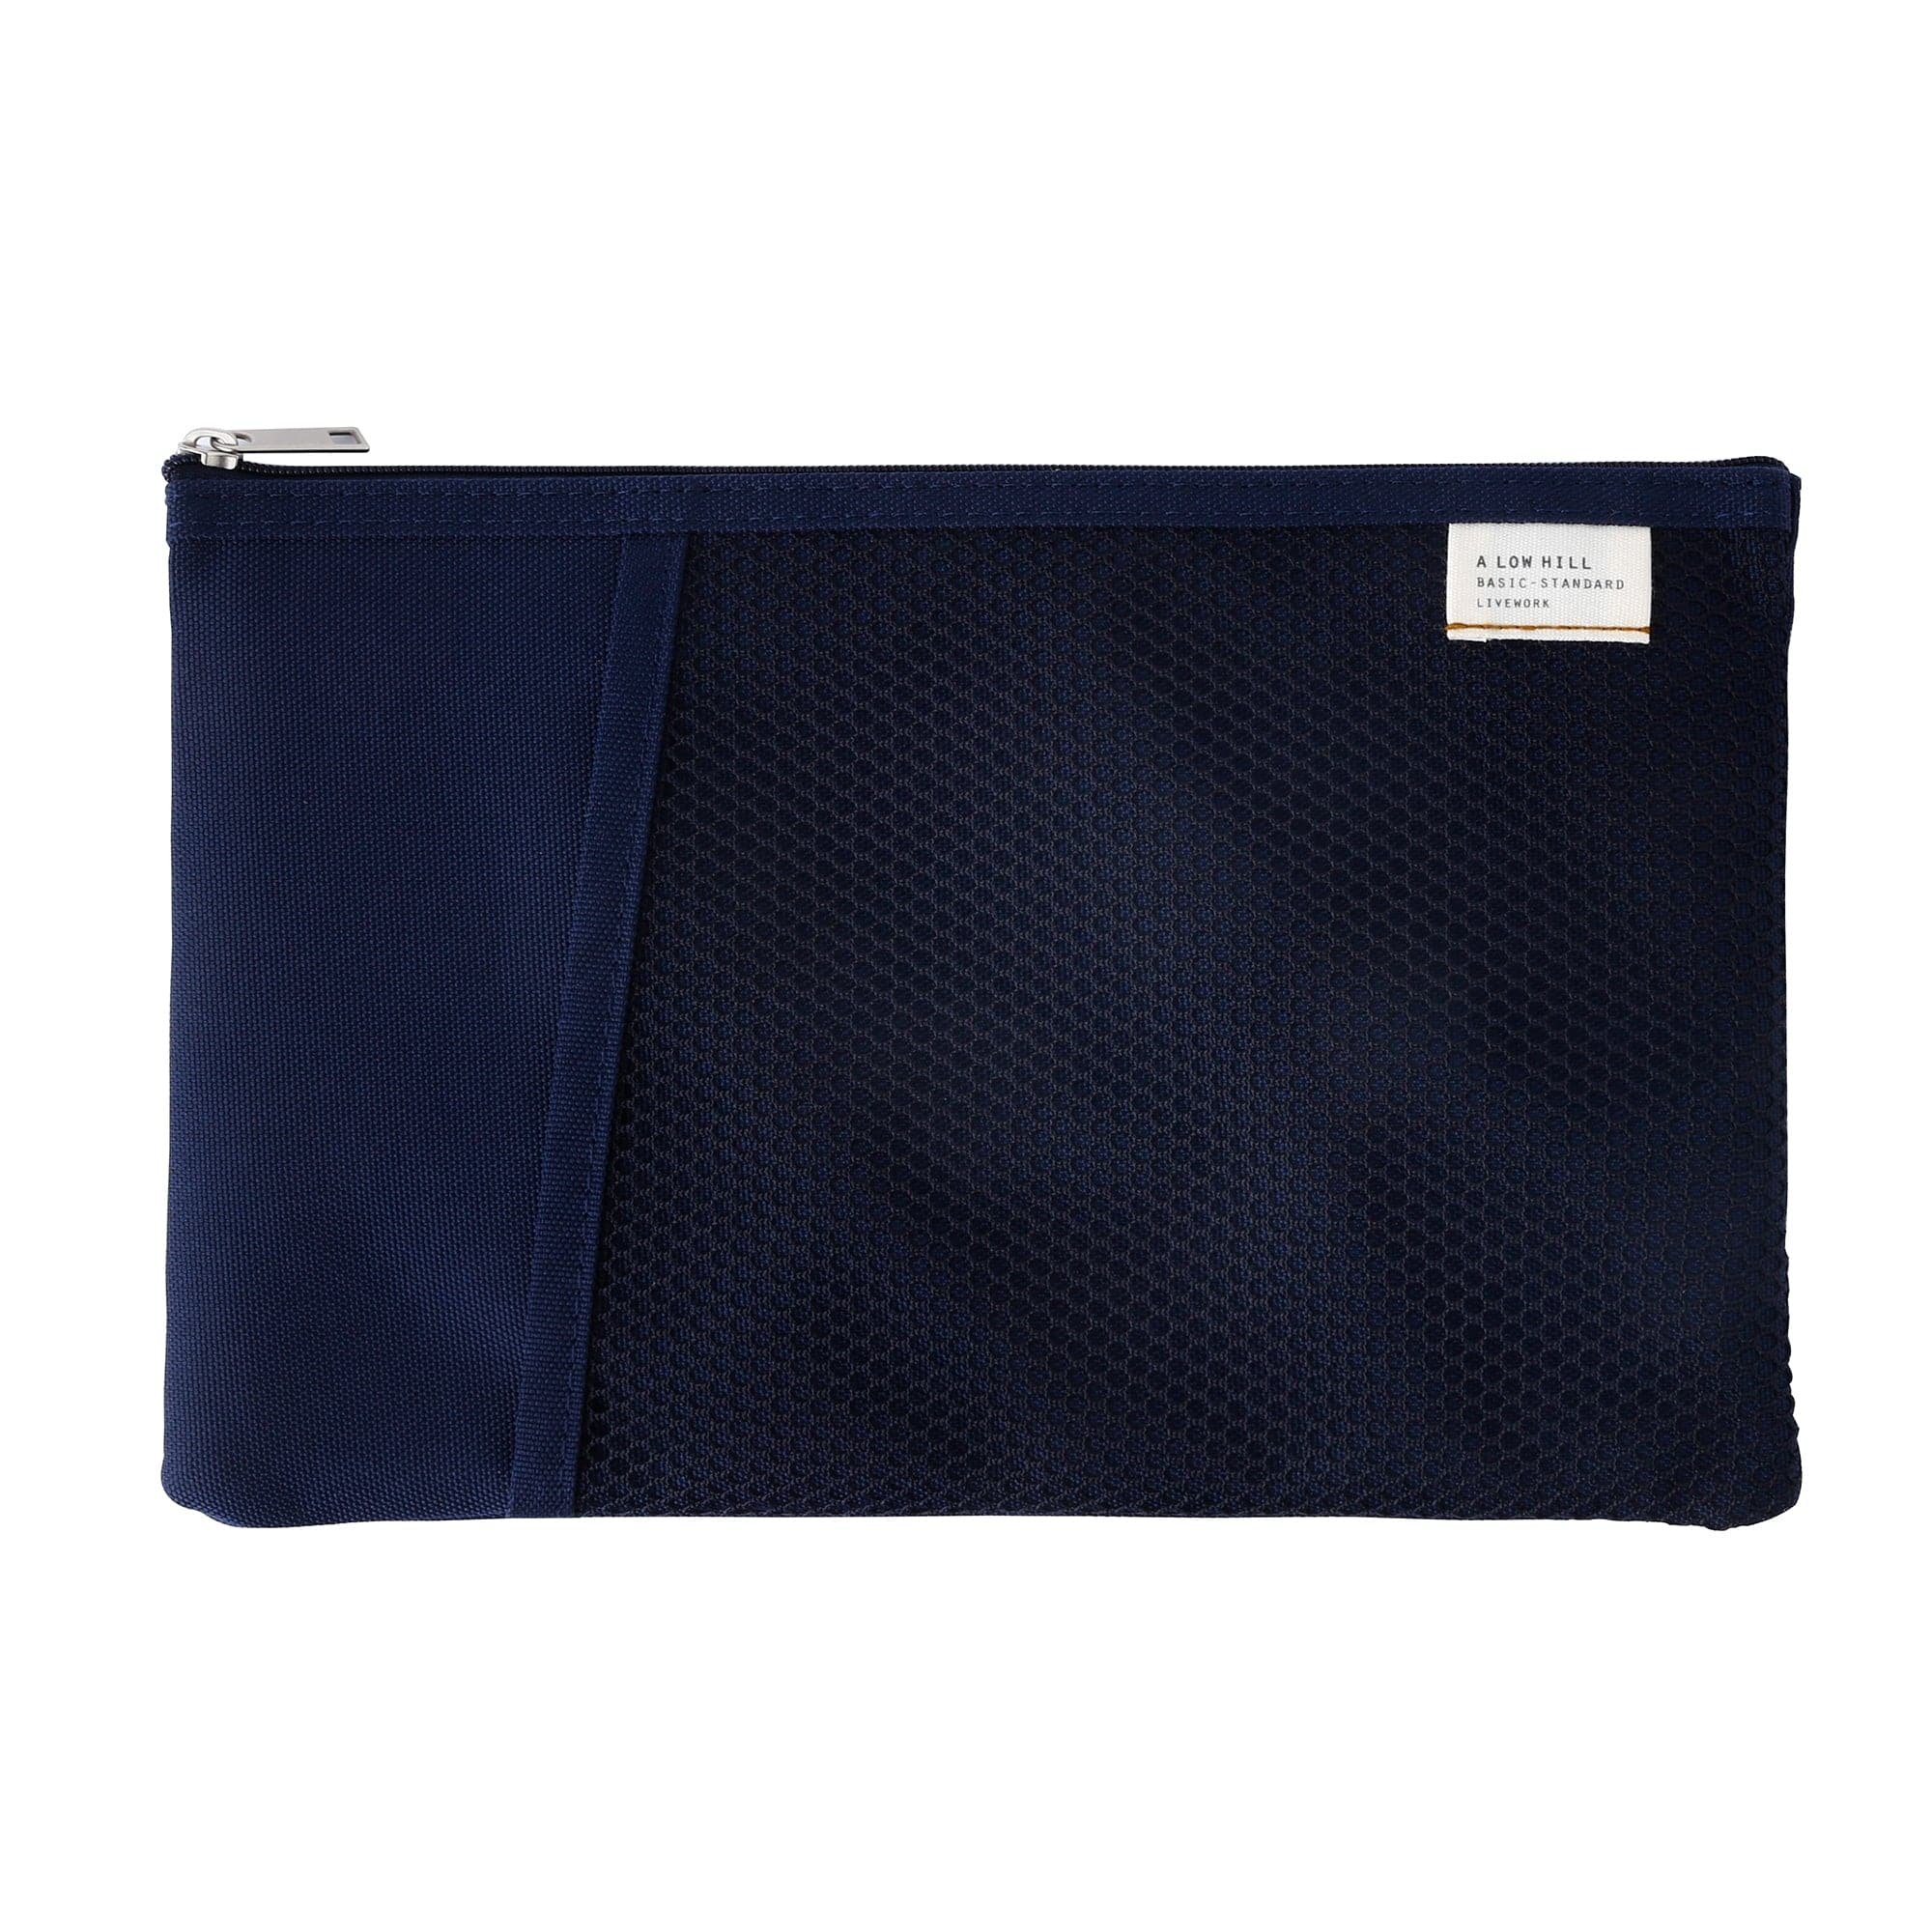 Livework Large A Low Hill Pocket Pen Pouch, Navy